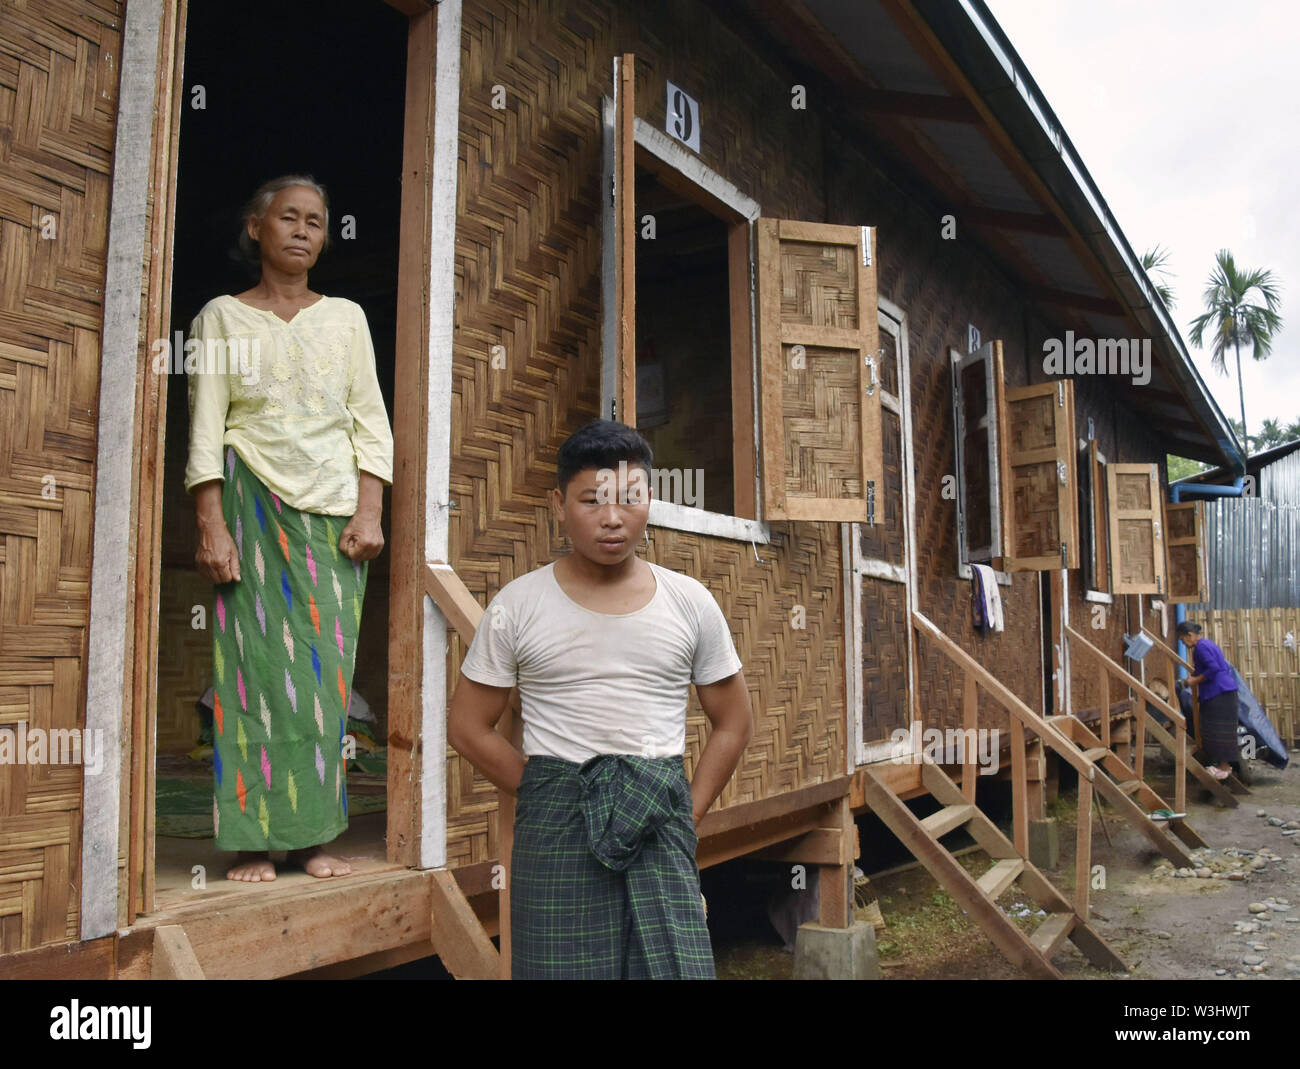 Photo taken July 15, 2019, shows temporary housing built by Japan's Nippon Foundation in Myitkyina, the capital of Kachin State, Myanmar, for people who have been displaced following fighting between Myanmar government forces and the insurgent Kachin Independence Army over the control of resources. (Kyodo)==Kyodo Photo via Credit: Newscom/Alamy Live News Stock Photo